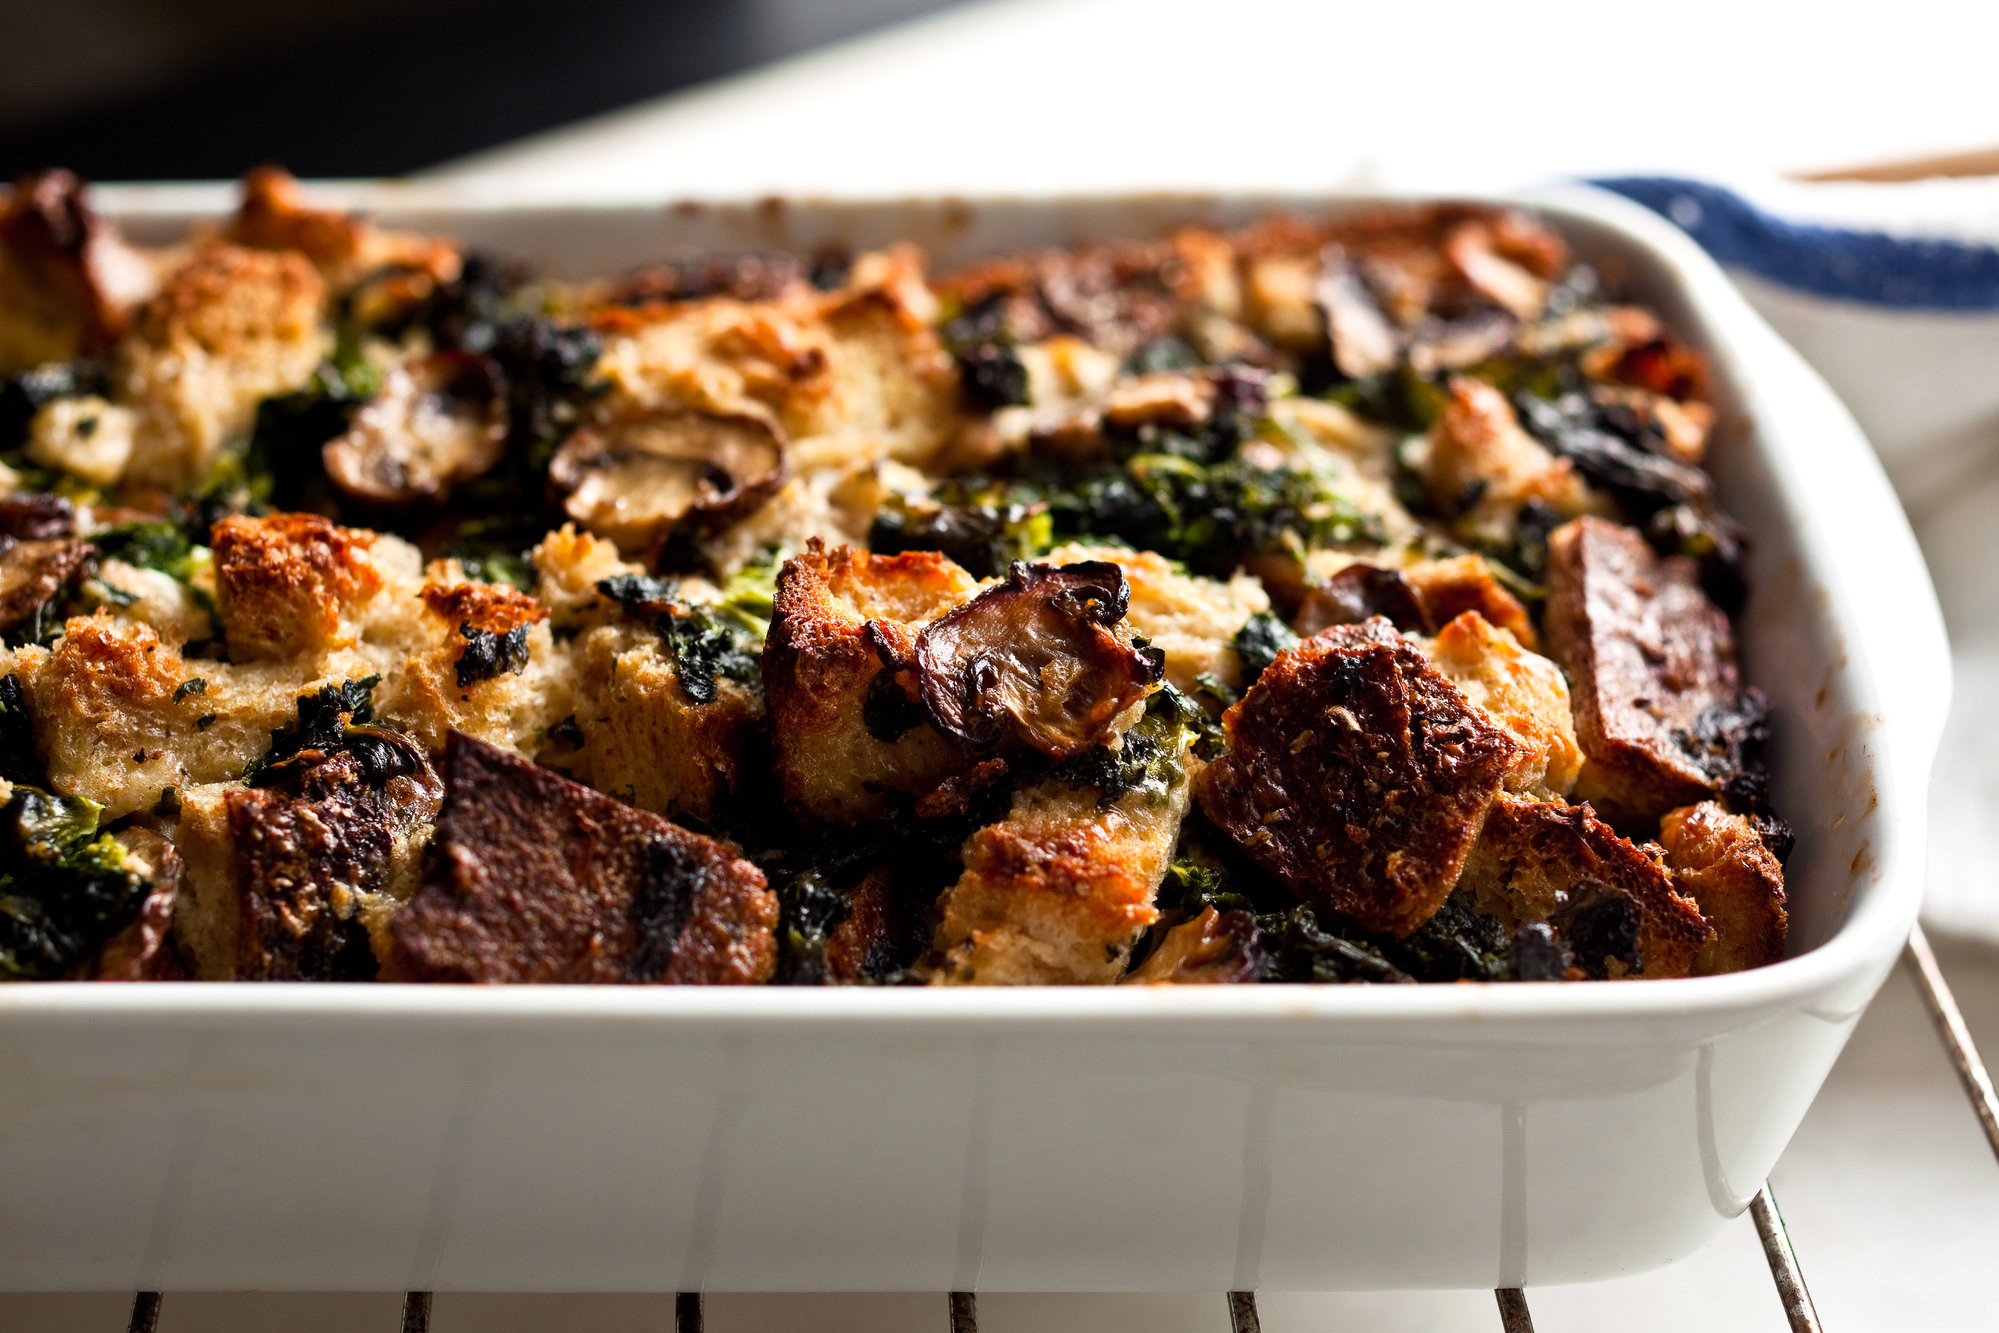 Savory Bread Pudding Recipes
 Savory Bread Pudding With Kale and Mushrooms Recipe NYT